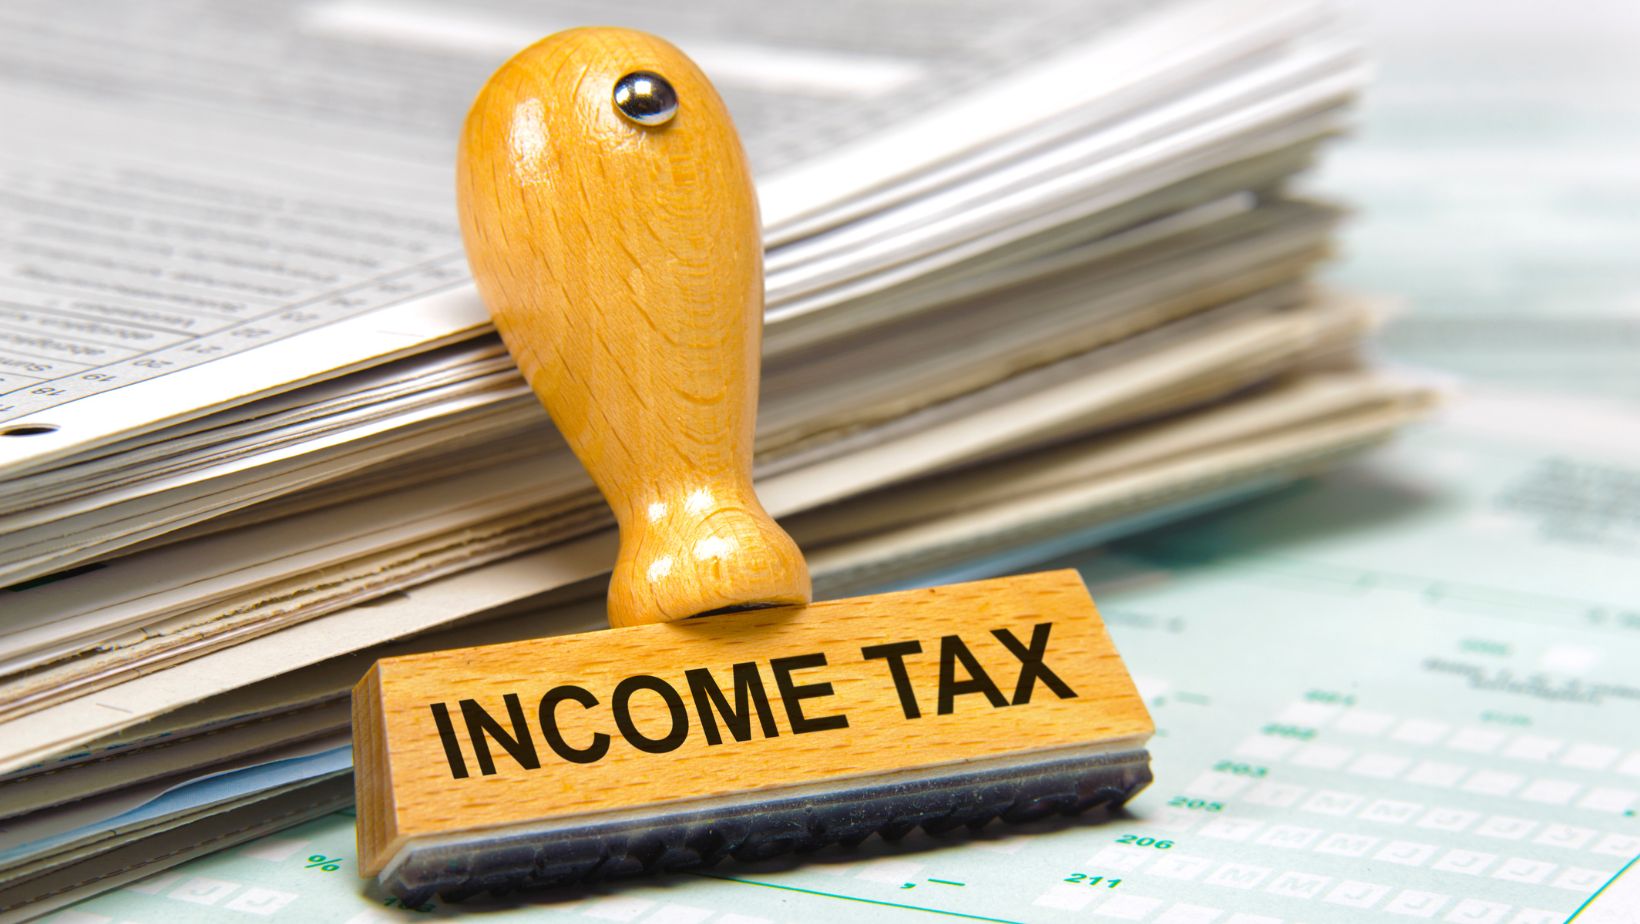 which of these best describes income tax?